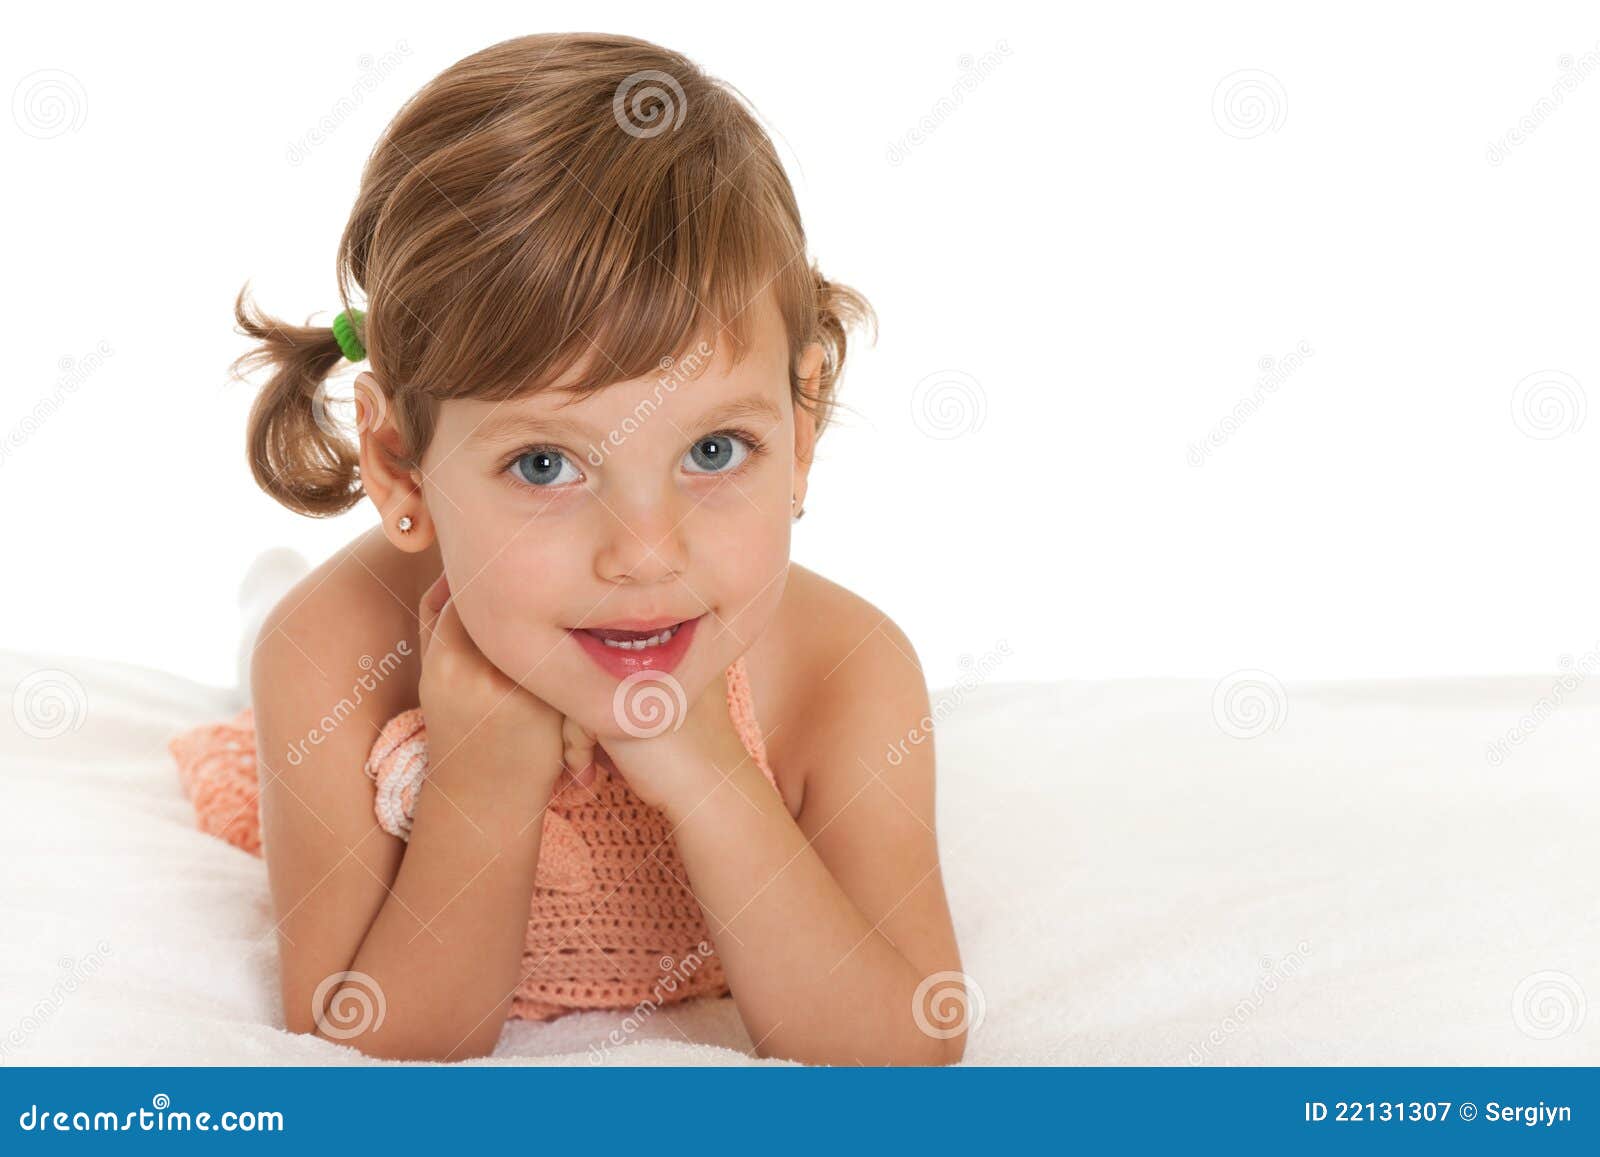 cheerful little girl on the bedspread